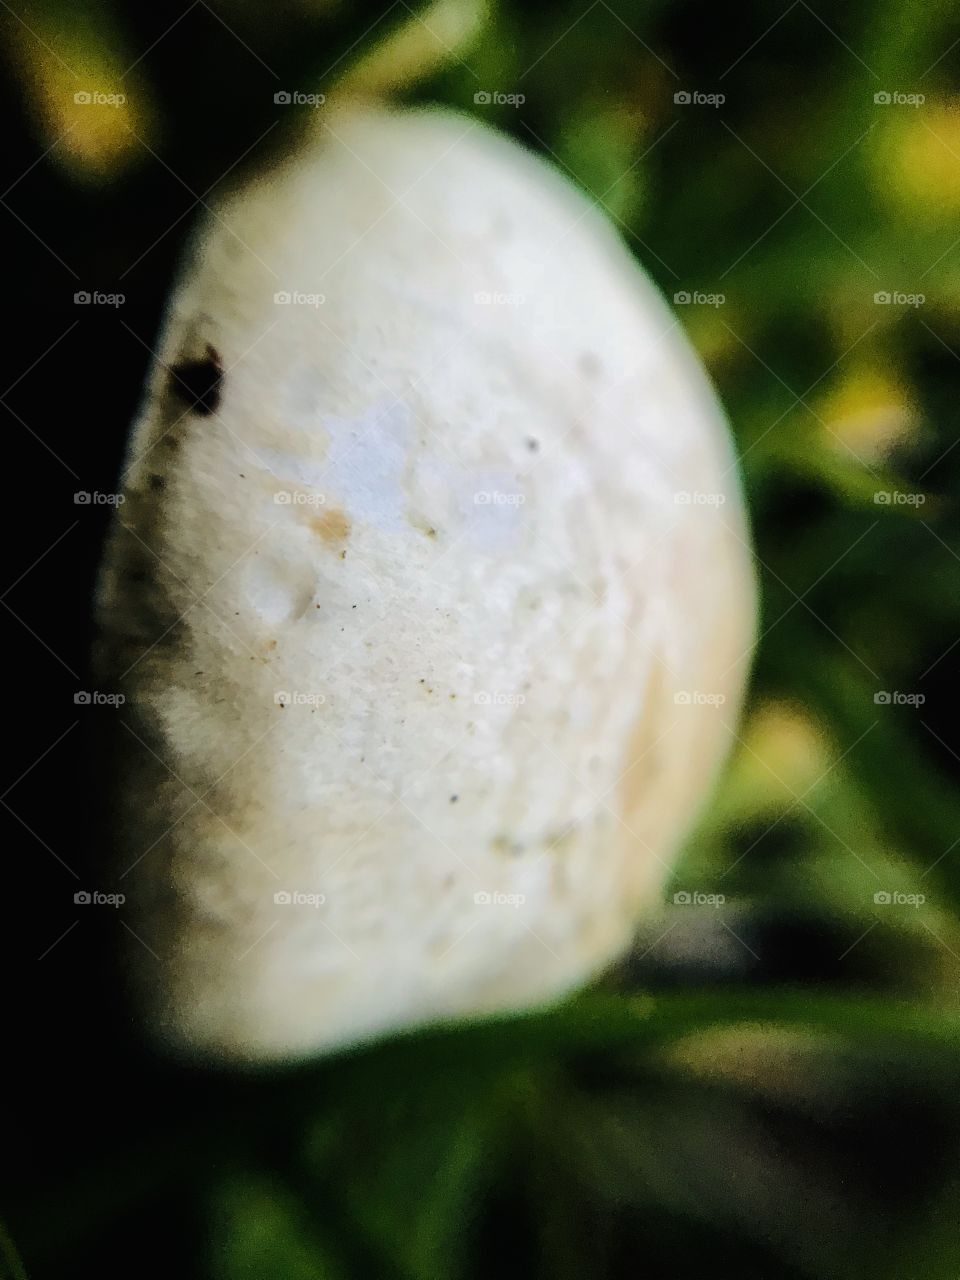 This is the photo shot with the macro lens of a mushroom it has plenty plenty of green and white and is very beautiful